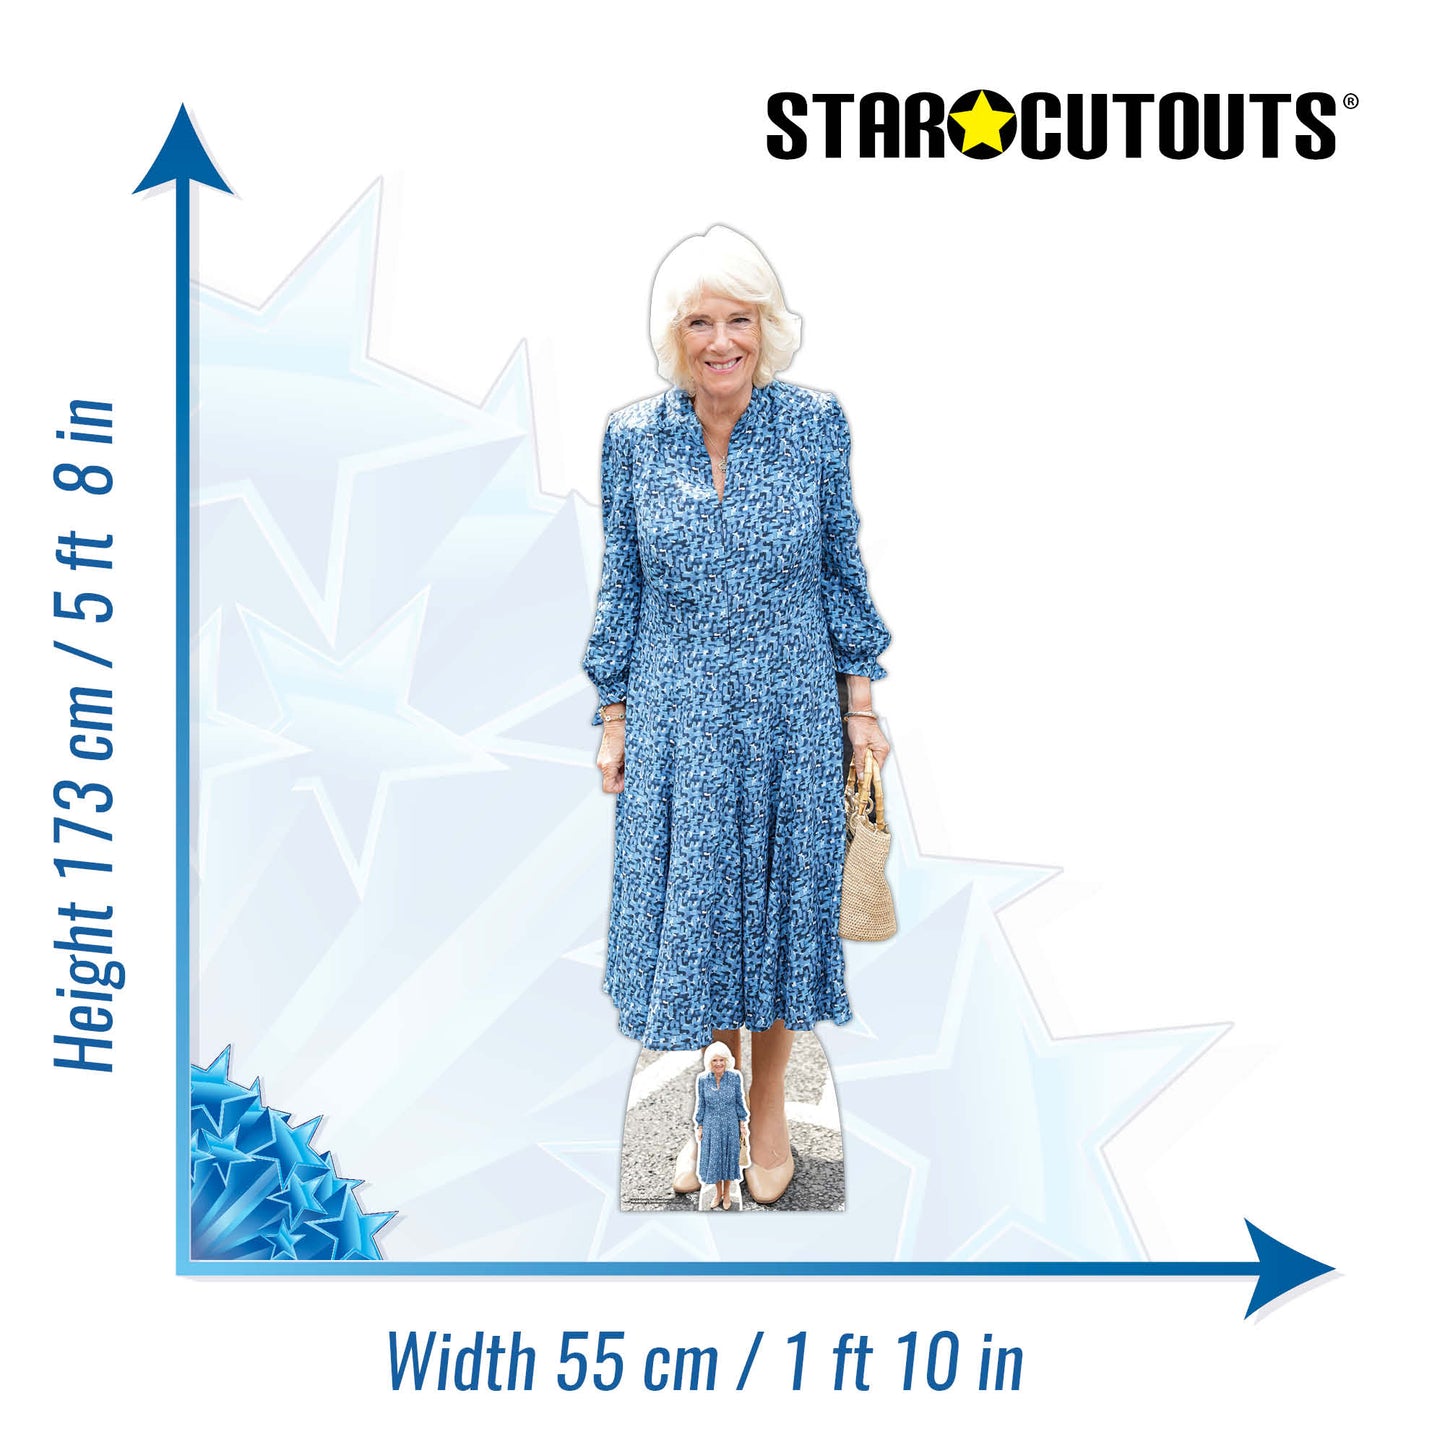 SC4208 Camilla The Queen Consort Cardboard Cut Out Height 173cm